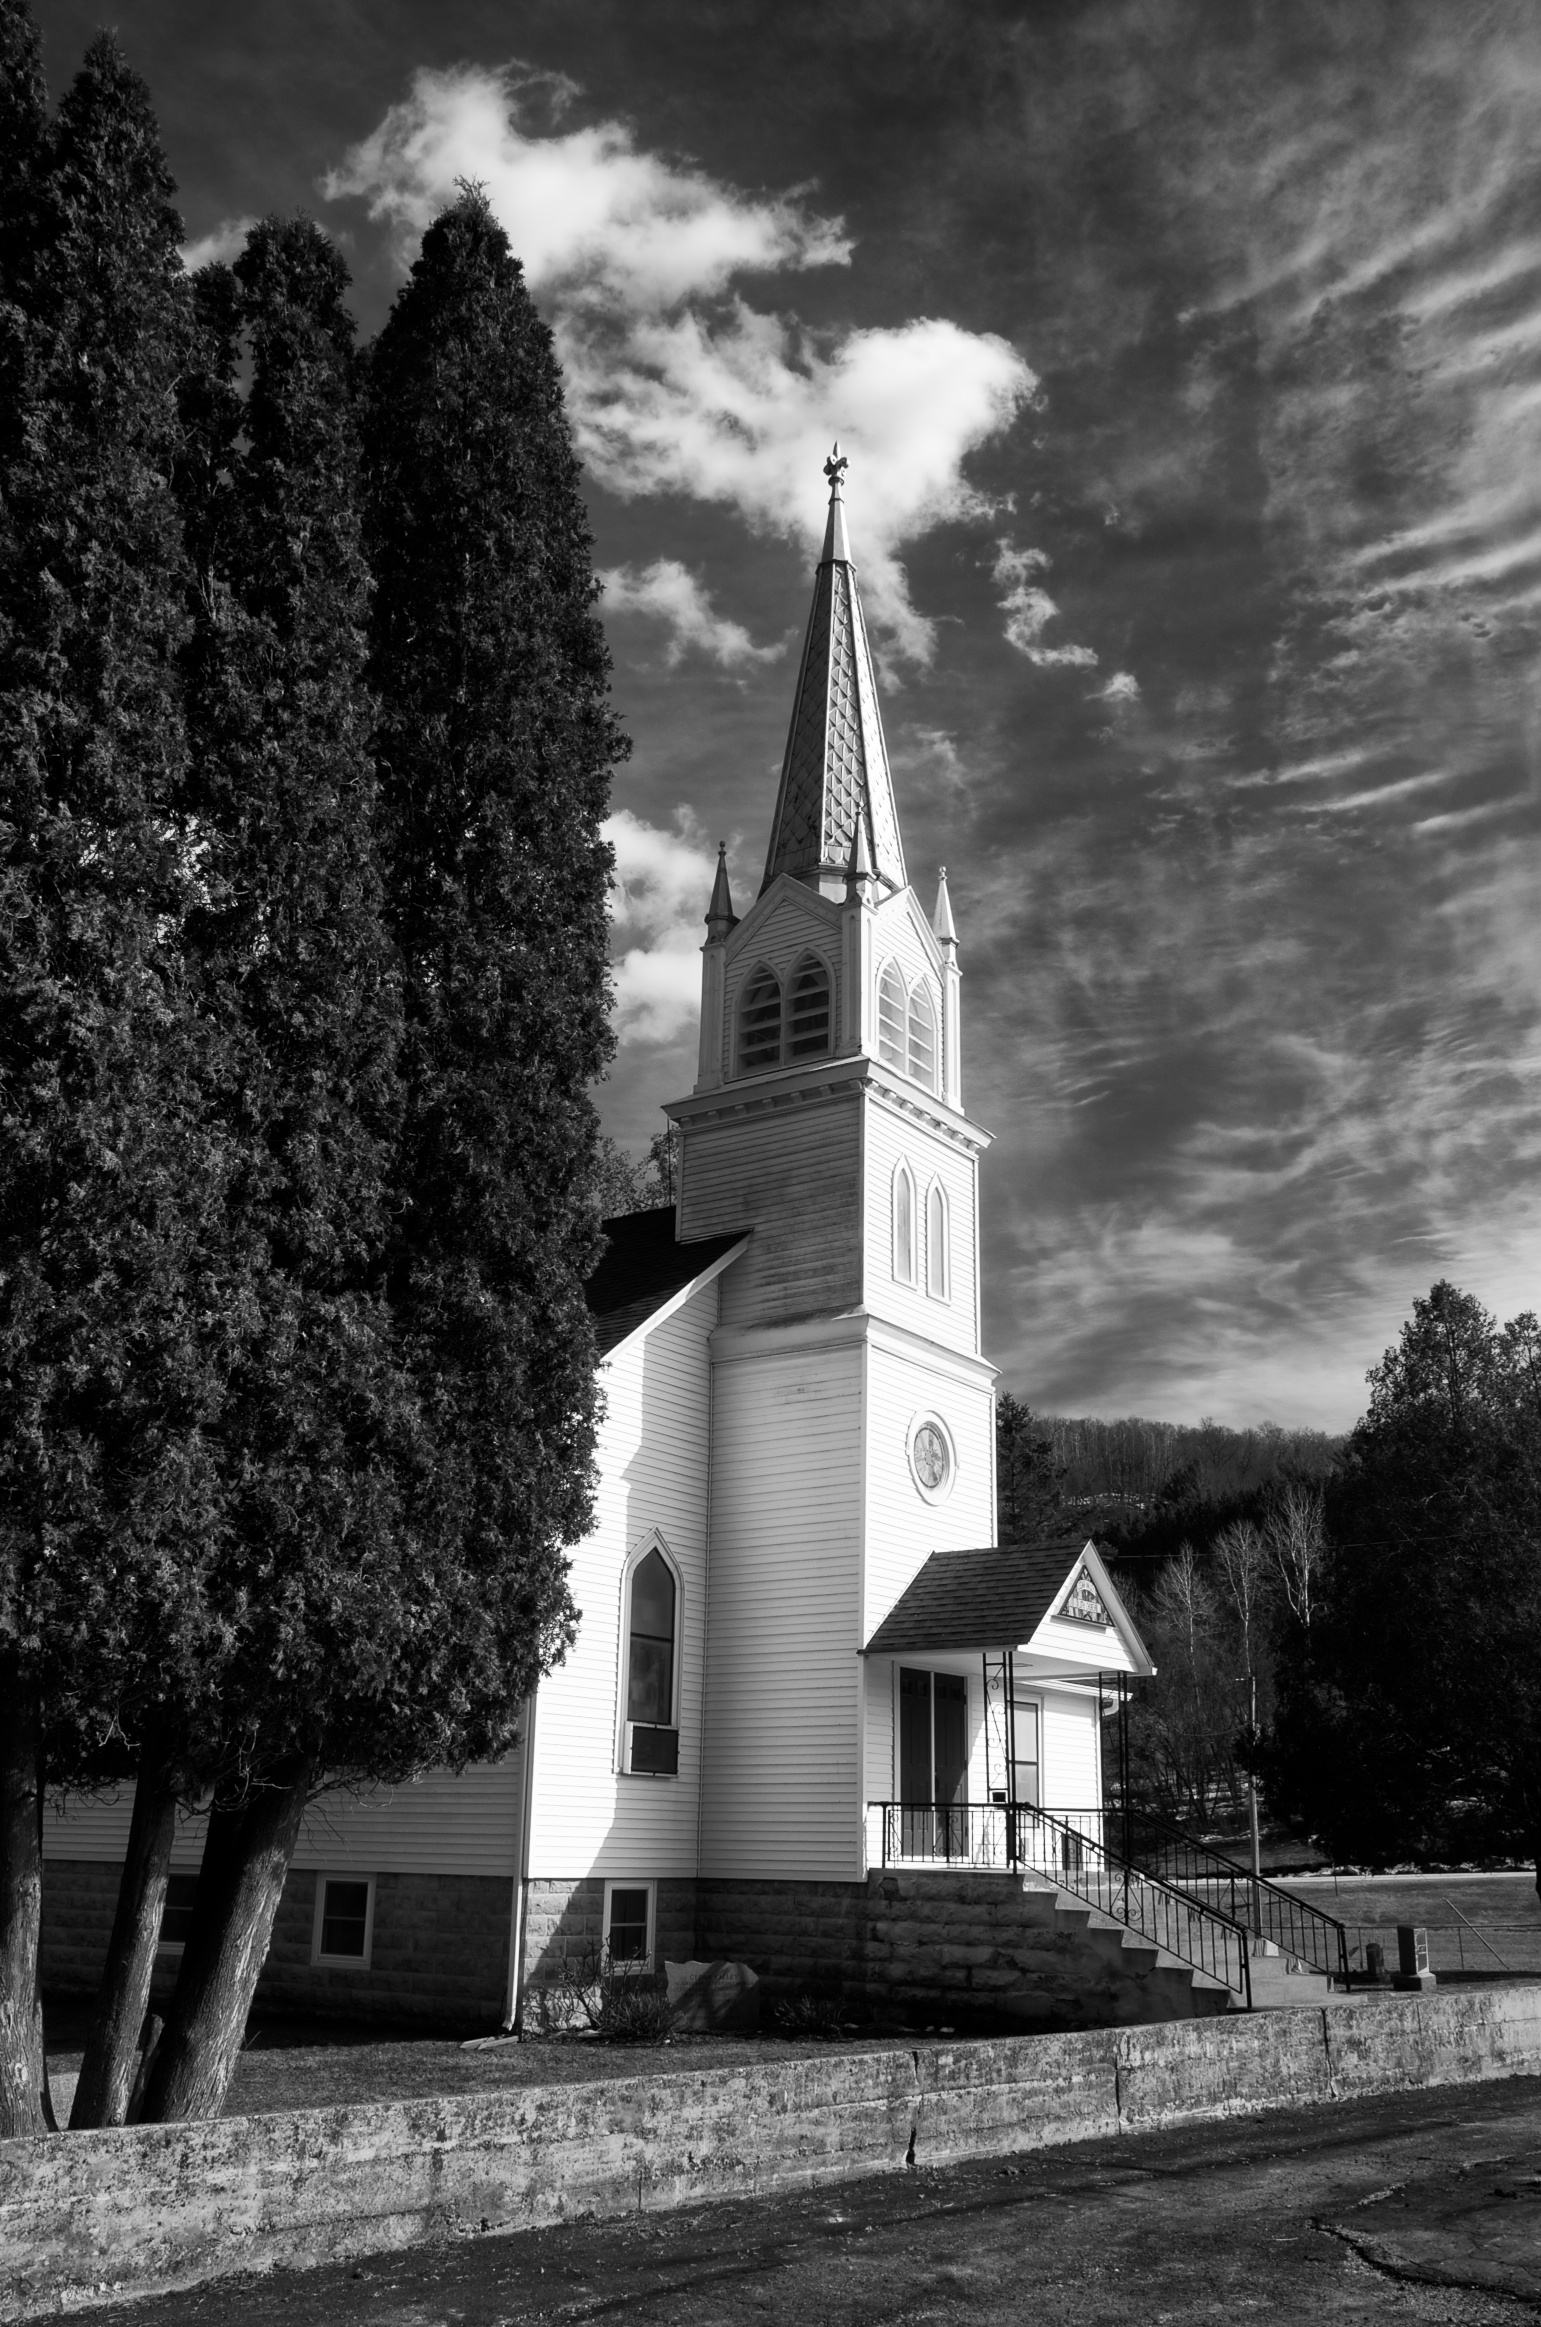 this is a black and white image of a church